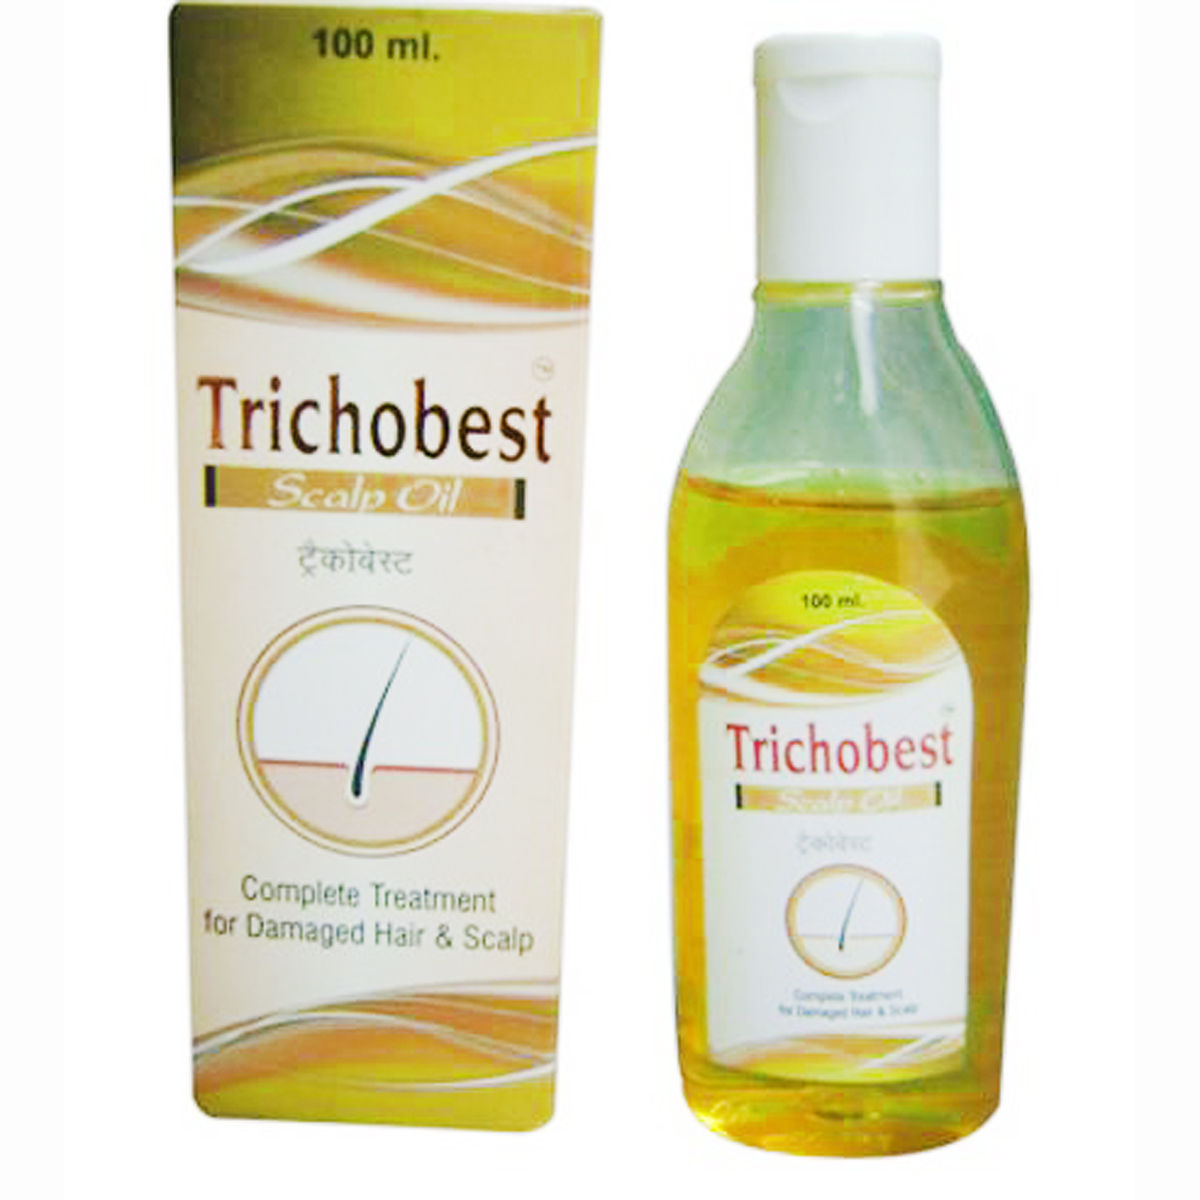 Trichobest Hair Oil, 100 ml Price, Uses, Side Effects, Composition - Apollo  Pharmacy